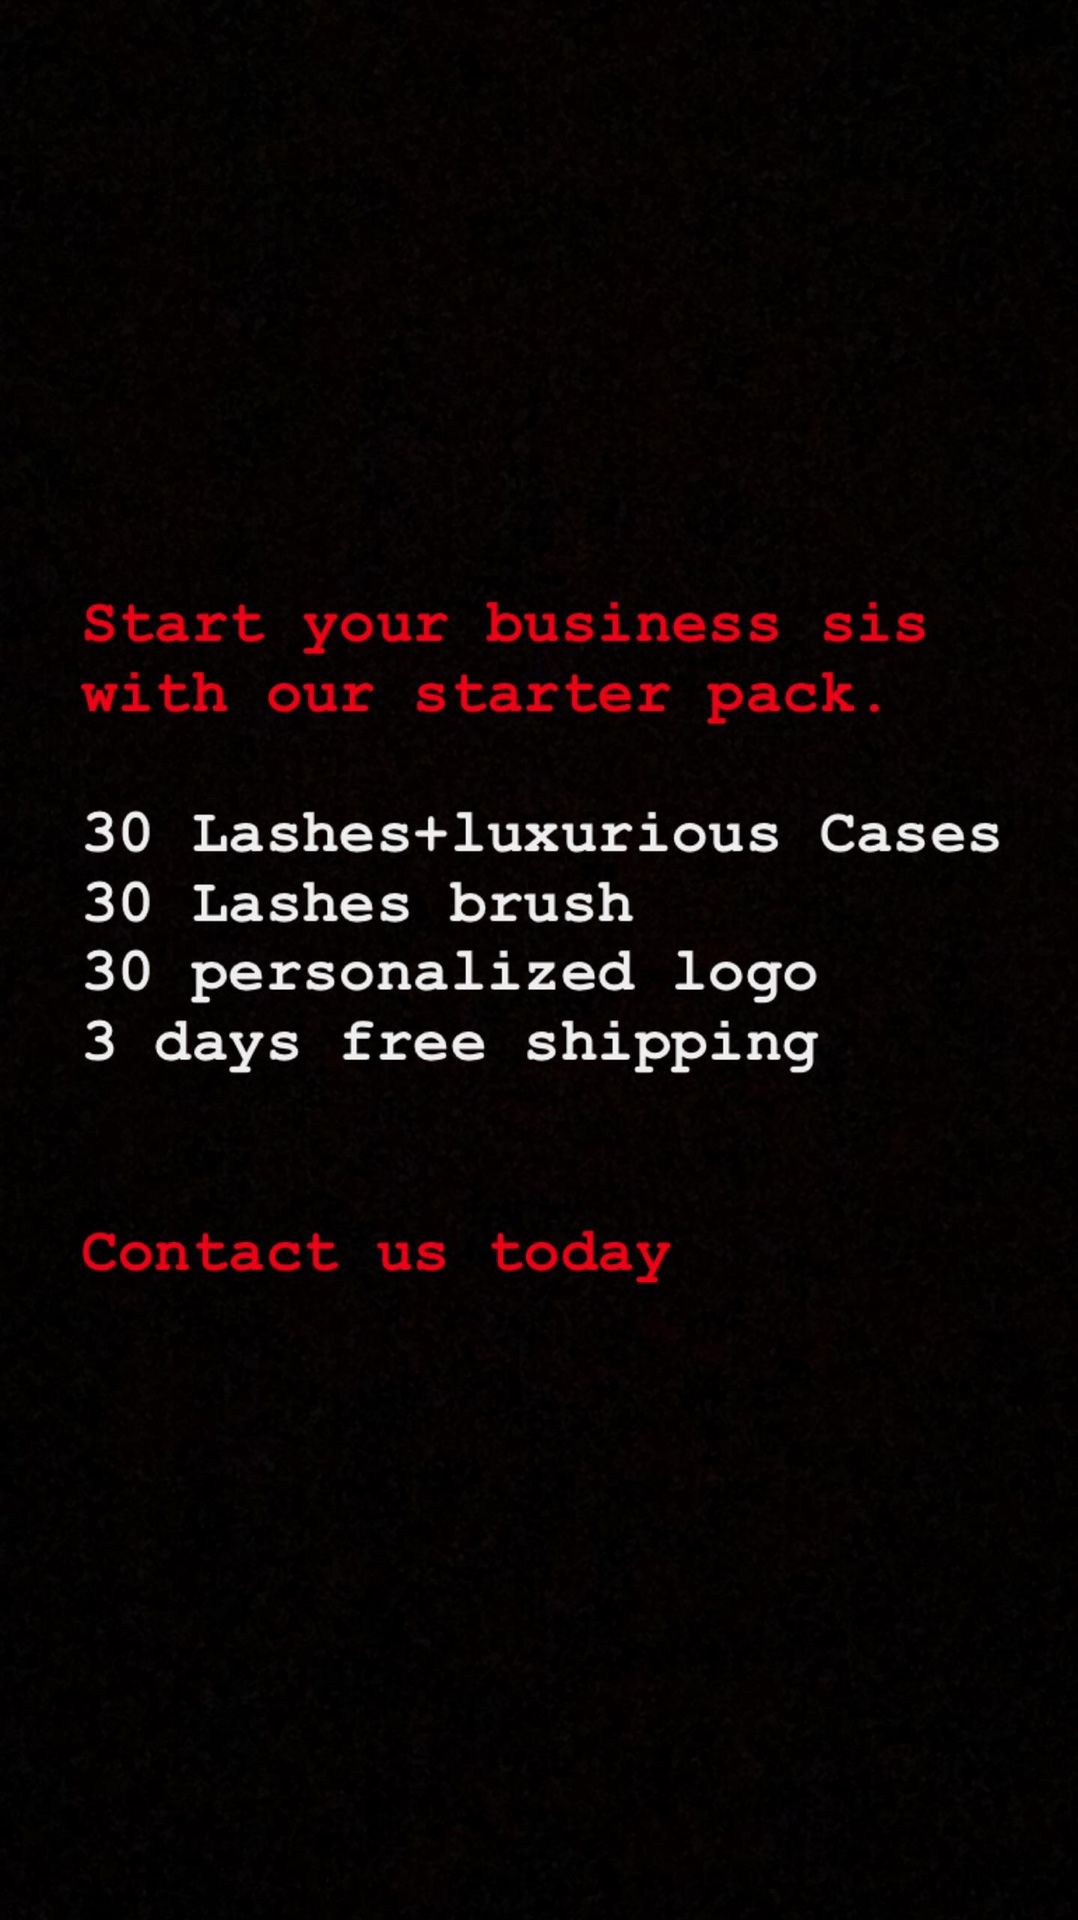 START YOUR LASHES BUSINESS